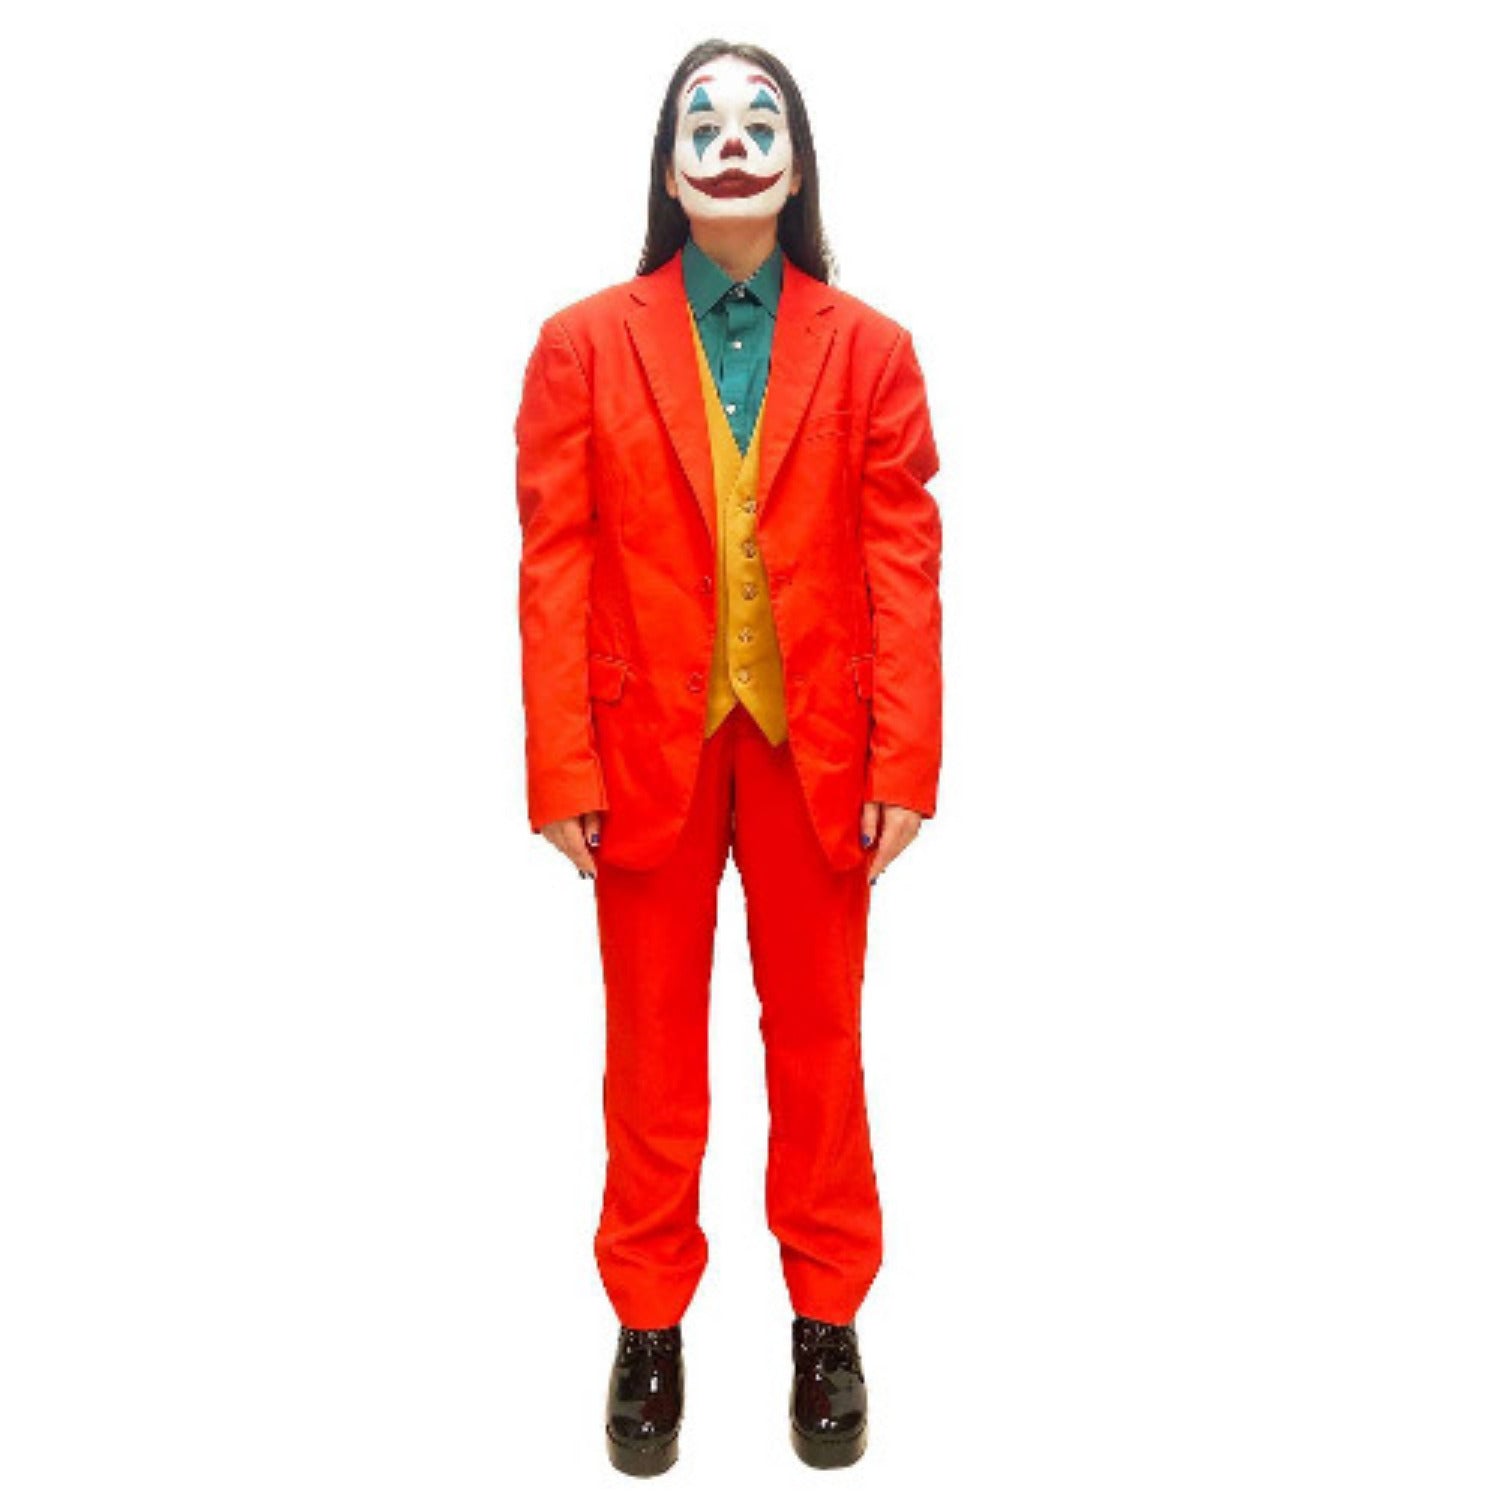  Halloween Mask Creepy Scary Clown Full Face Horror 2019 Movie  Joker Costume Party Festival Cosplay Prop Decoration for Adult : Clothing,  Shoes & Jewelry